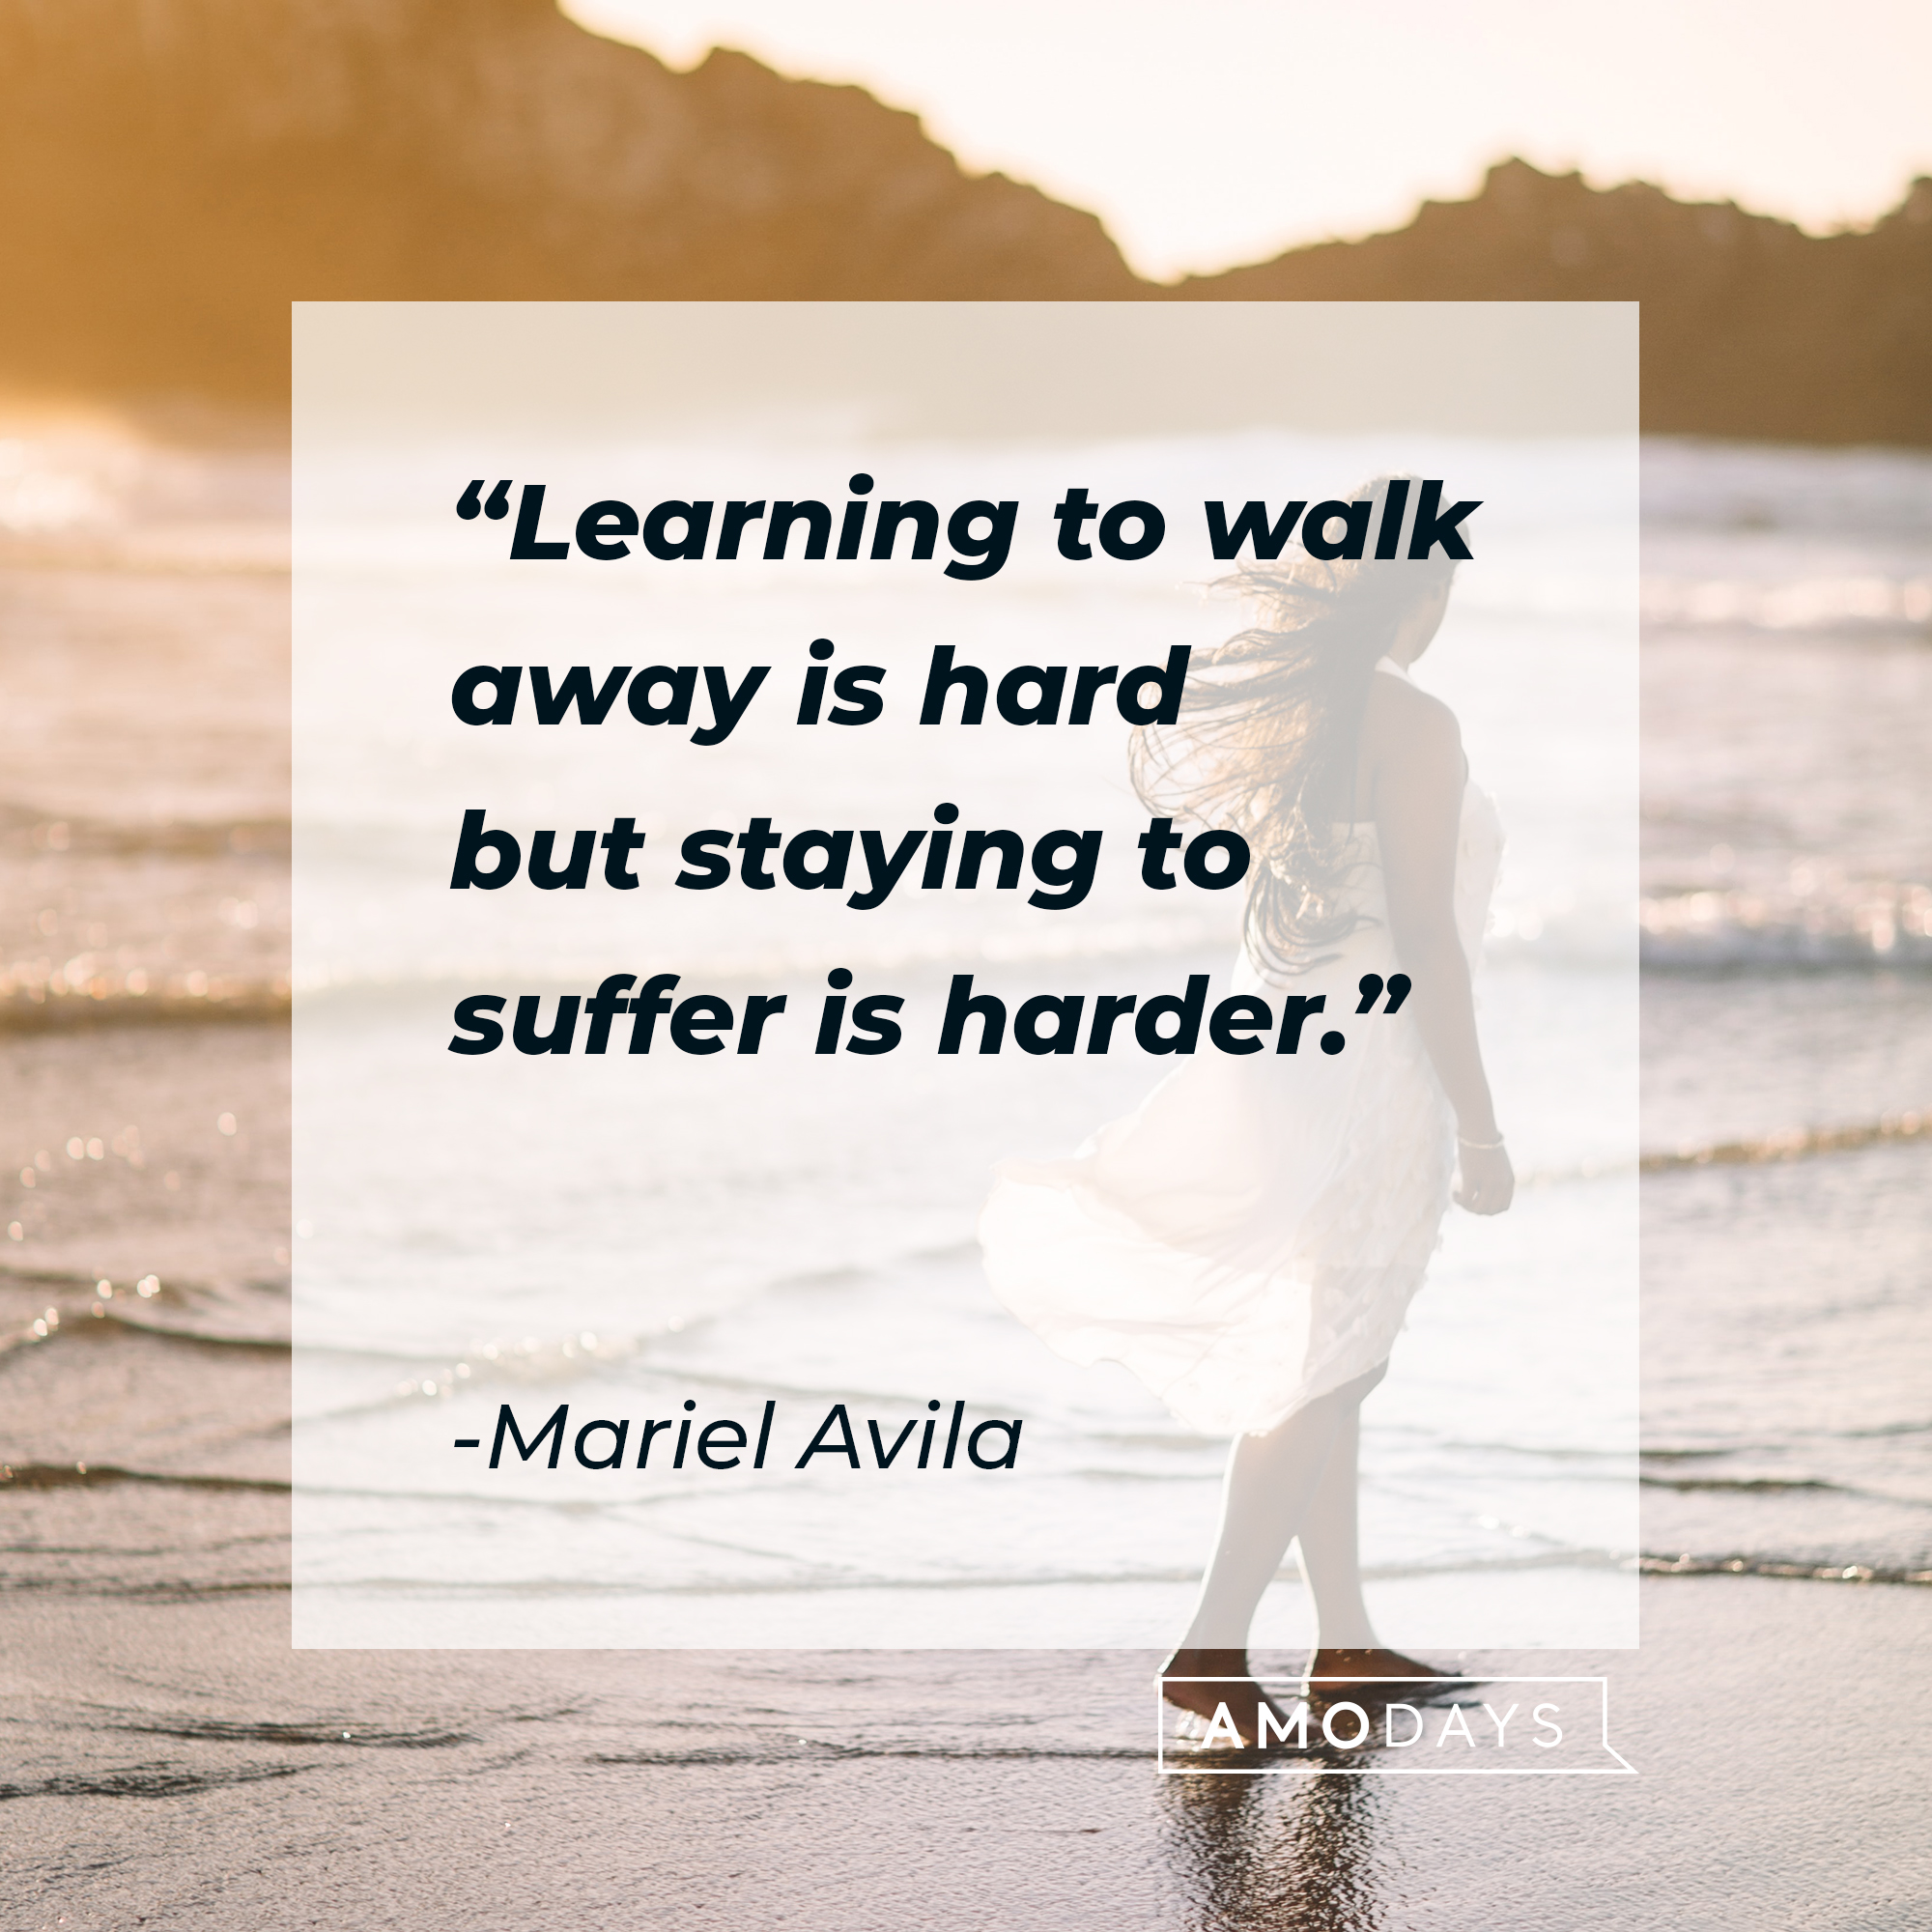 Mariel Avila's quote: "Learning to walk away is hard but staying to suffer is harder." | Image: Unsplash.com